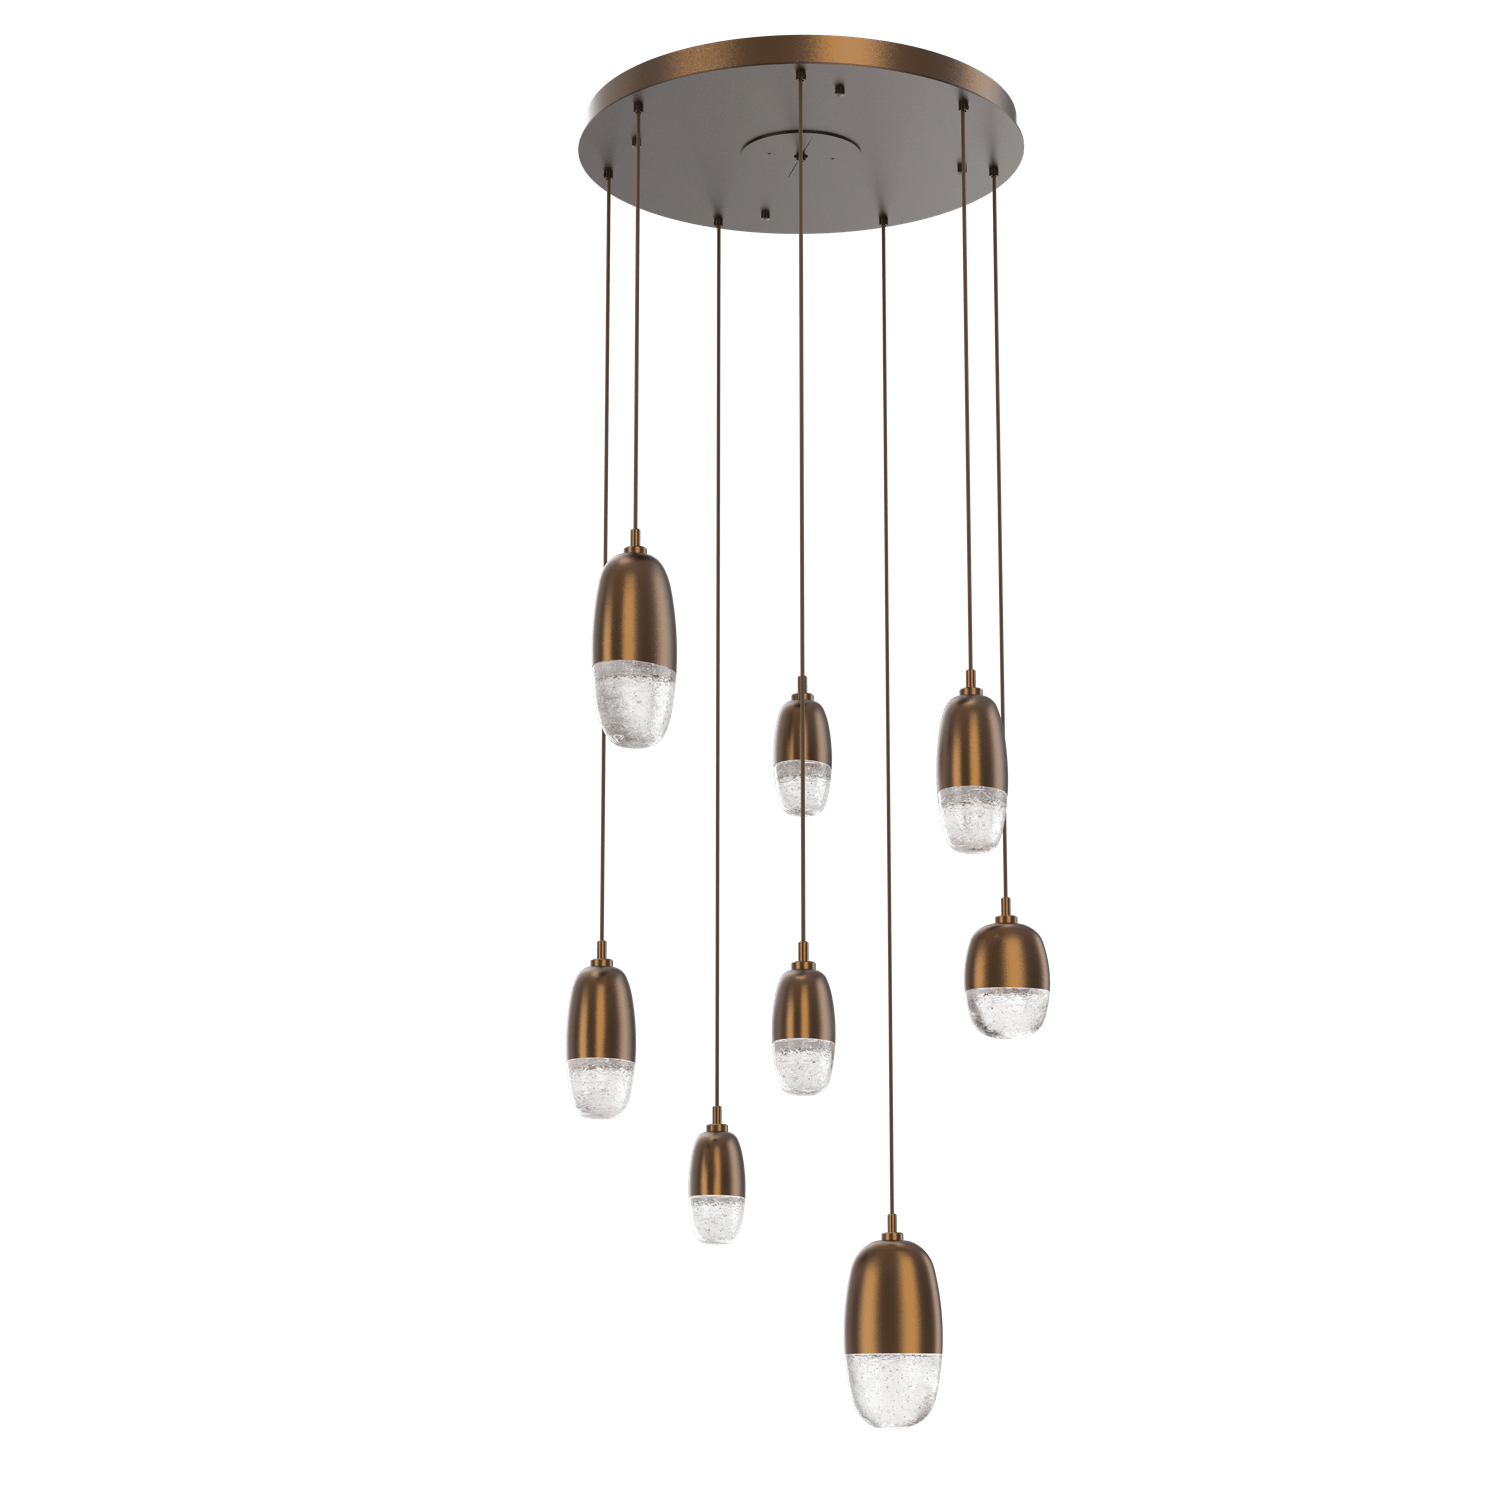 CHB0079-08-FB-Hammerton-Studio-Pebble-8-light-round-pendant-chandelier-with-flat-bronze-finish-and-clear-cast-glass-shades-and-LED-lamping